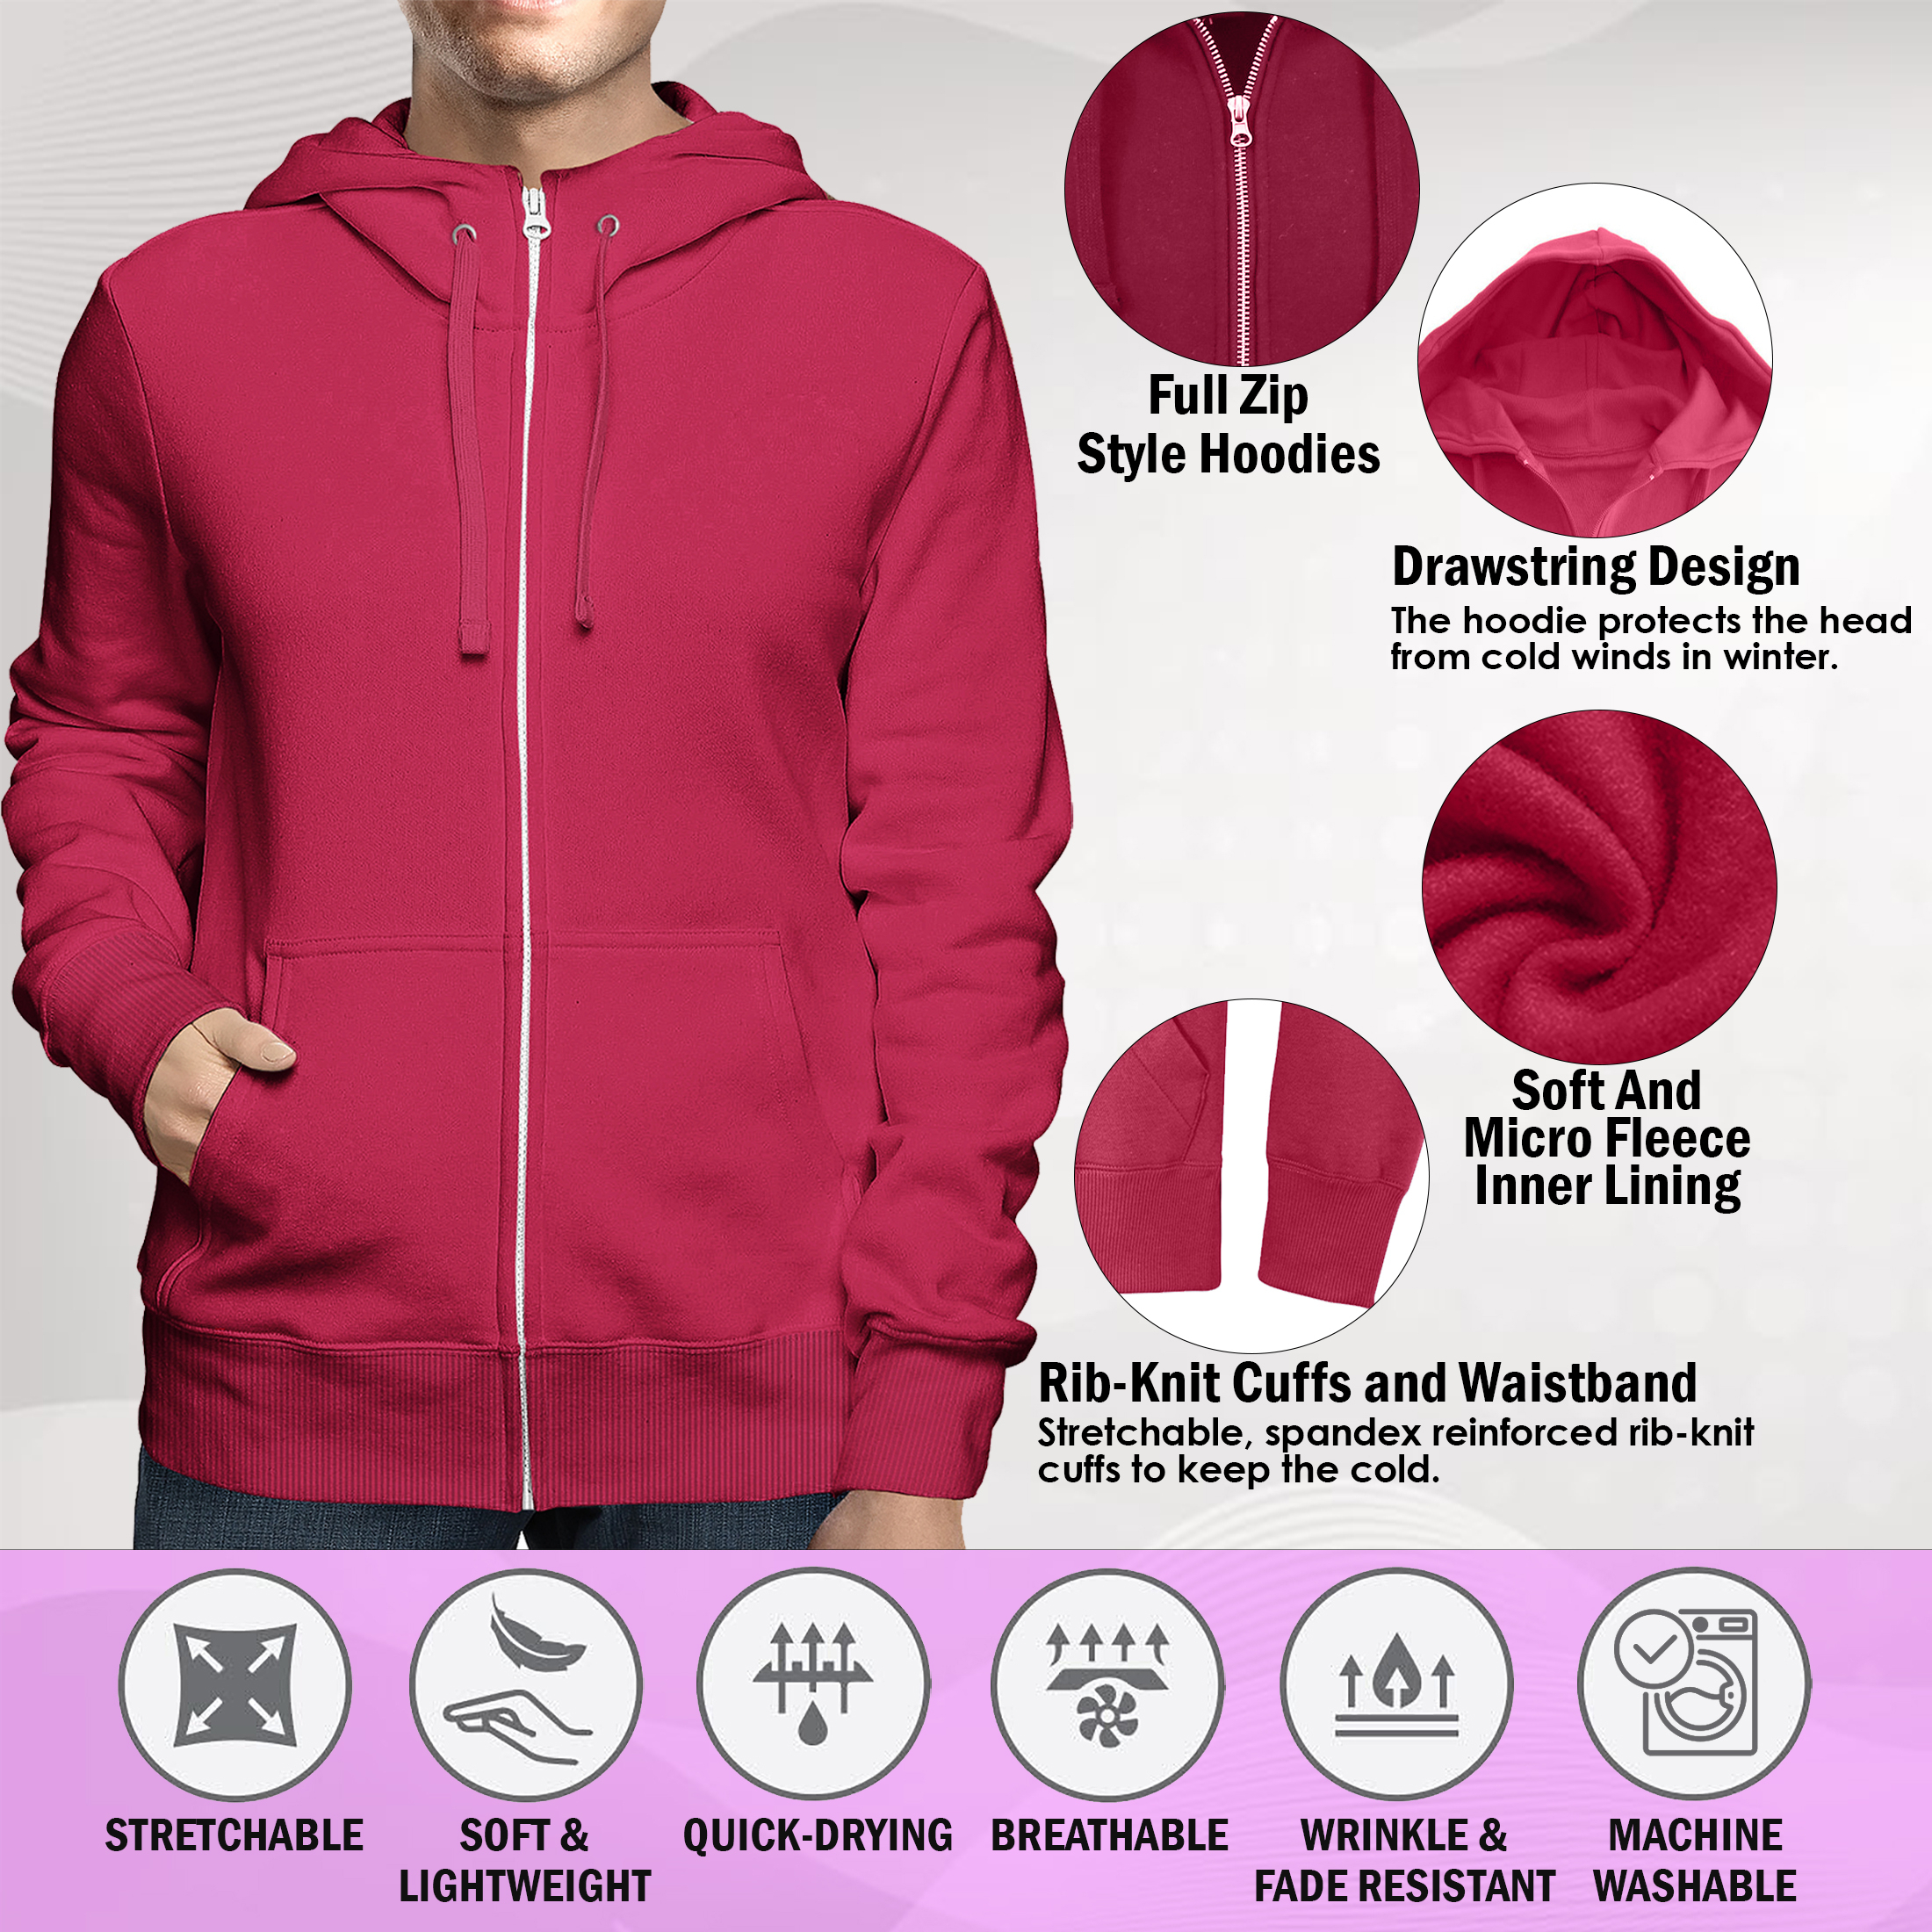 2-Pack: Men's Full Zip Up Fleece-Lined Hoodie Sweatshirt (Big & Tall Size Available) - Burgundy, 3x-large